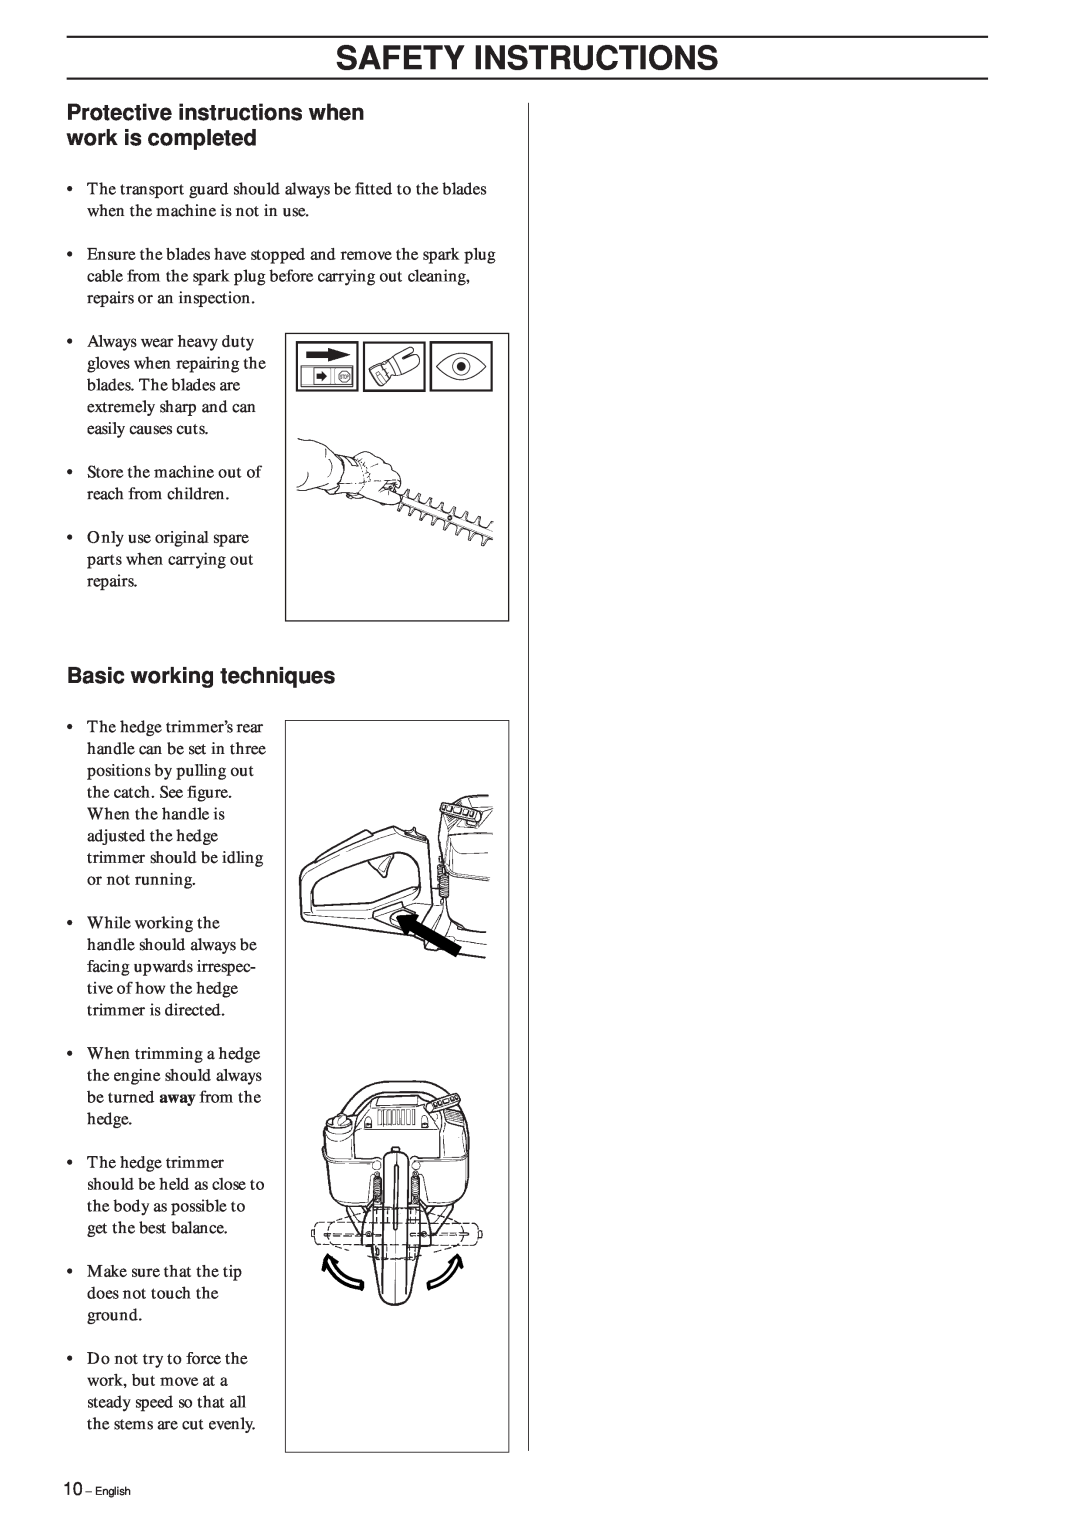 Husqvarna 225H60 manual Protective instructions when work is completed, Basic working techniques, Safety Instructions 